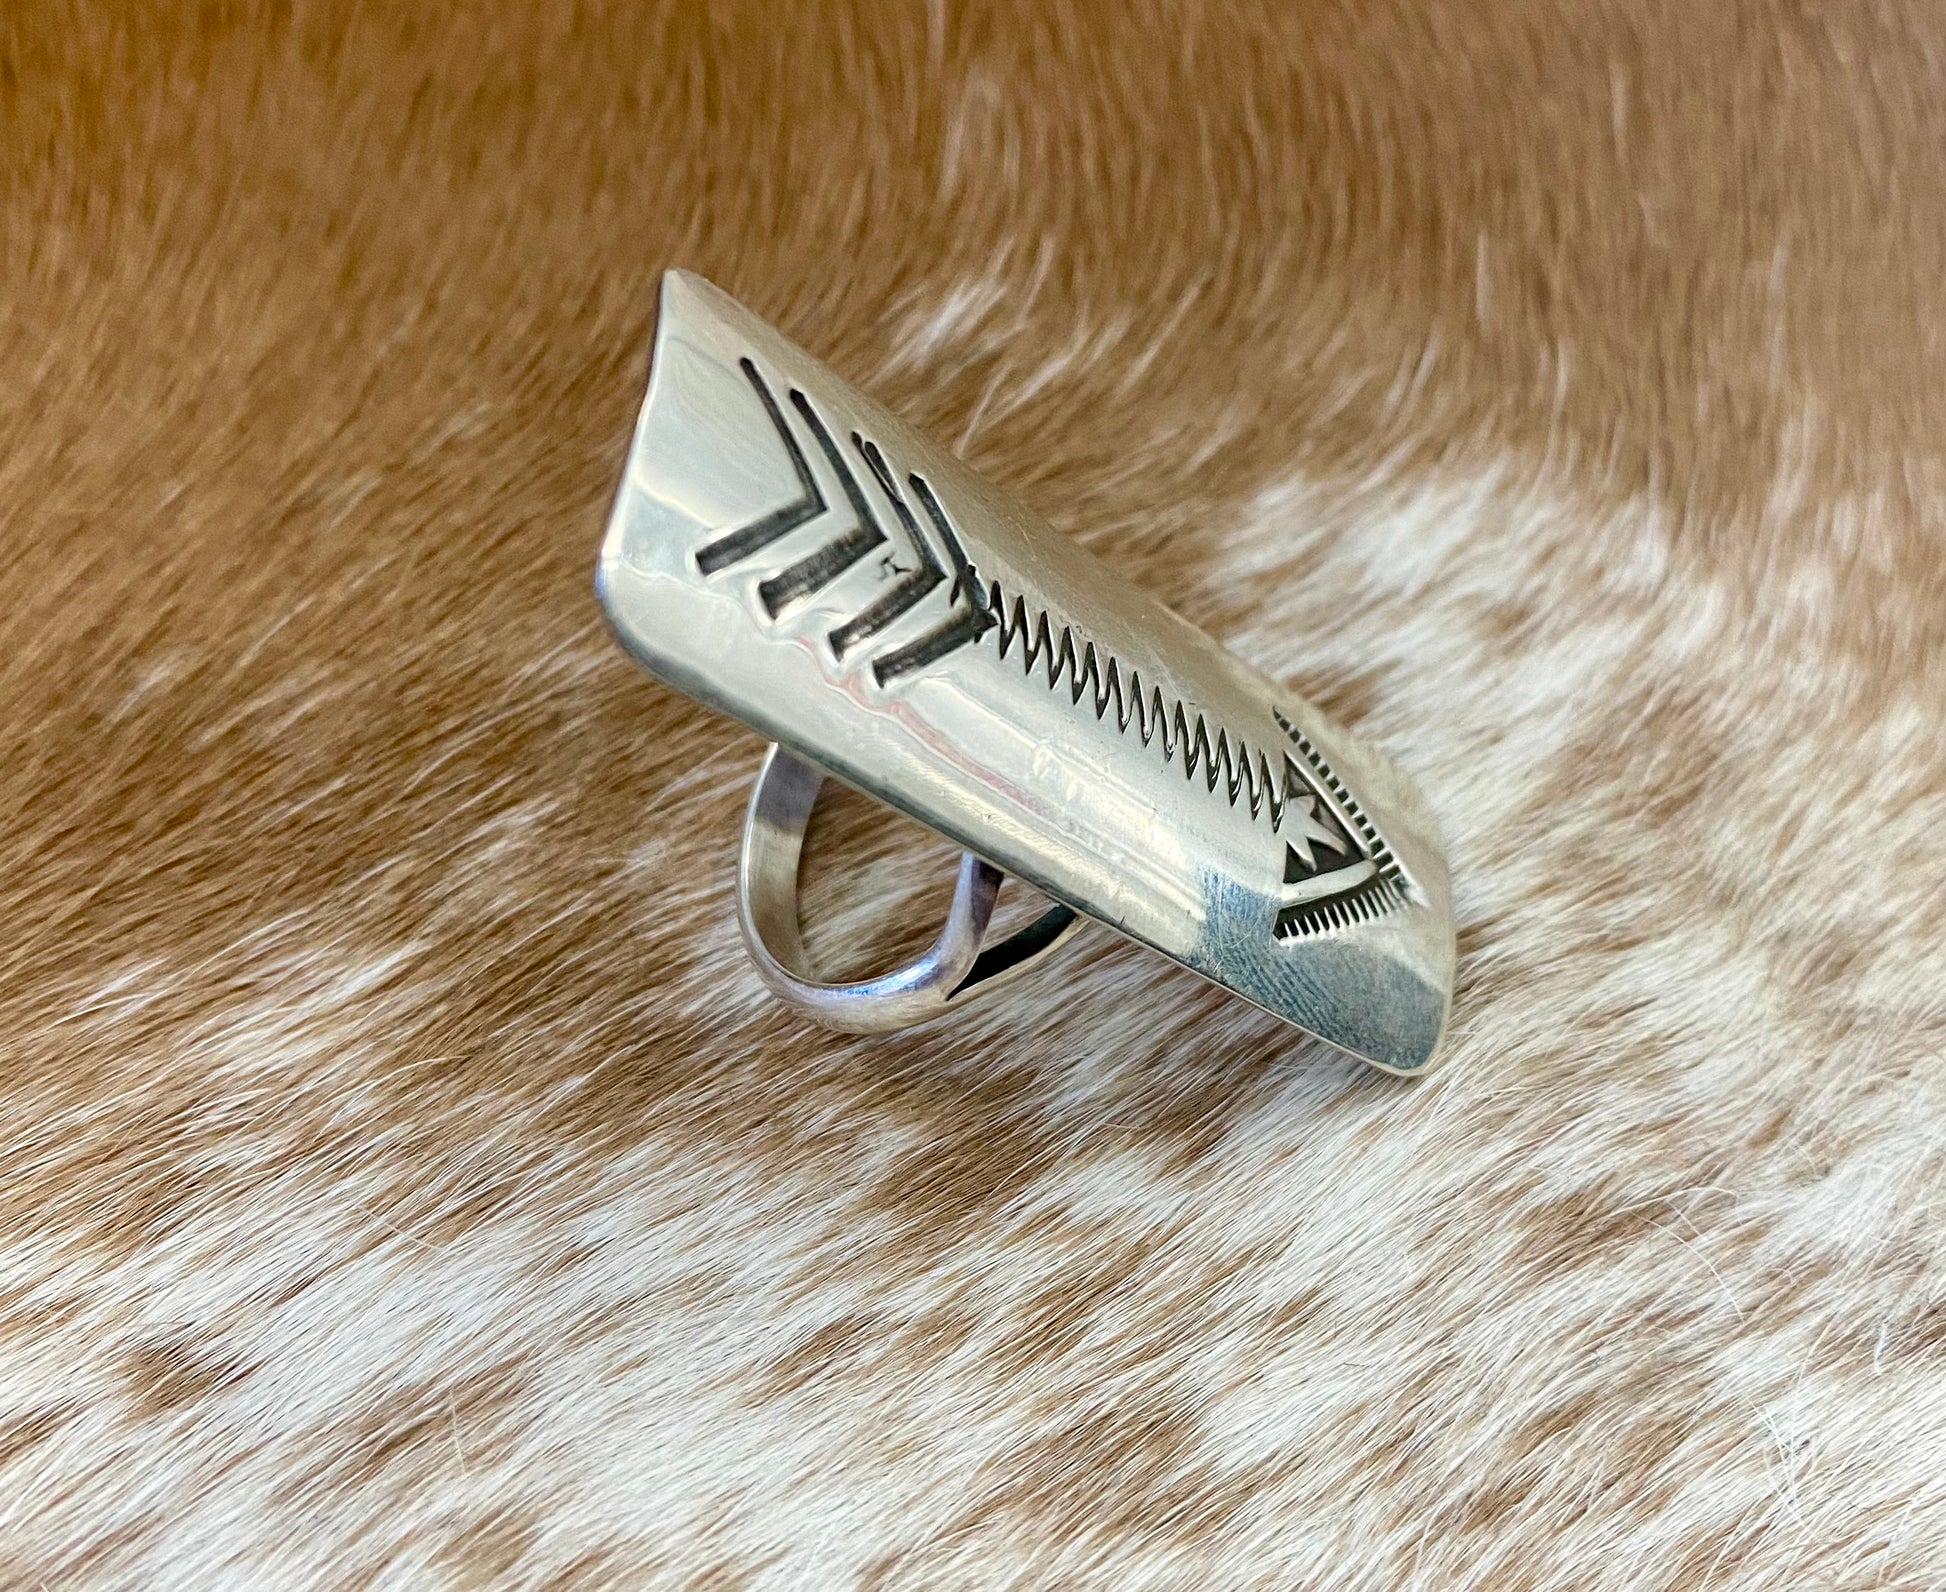 Long beautiful arrow design sterling silver statement ring. Stamped sterling and signed “K” by artist silversmith. Stunning size 8 unique piece. The perfect piece to wear on your index, middle, or ring finger!   Size: 1.75" Inch length   Signed: YES "K"